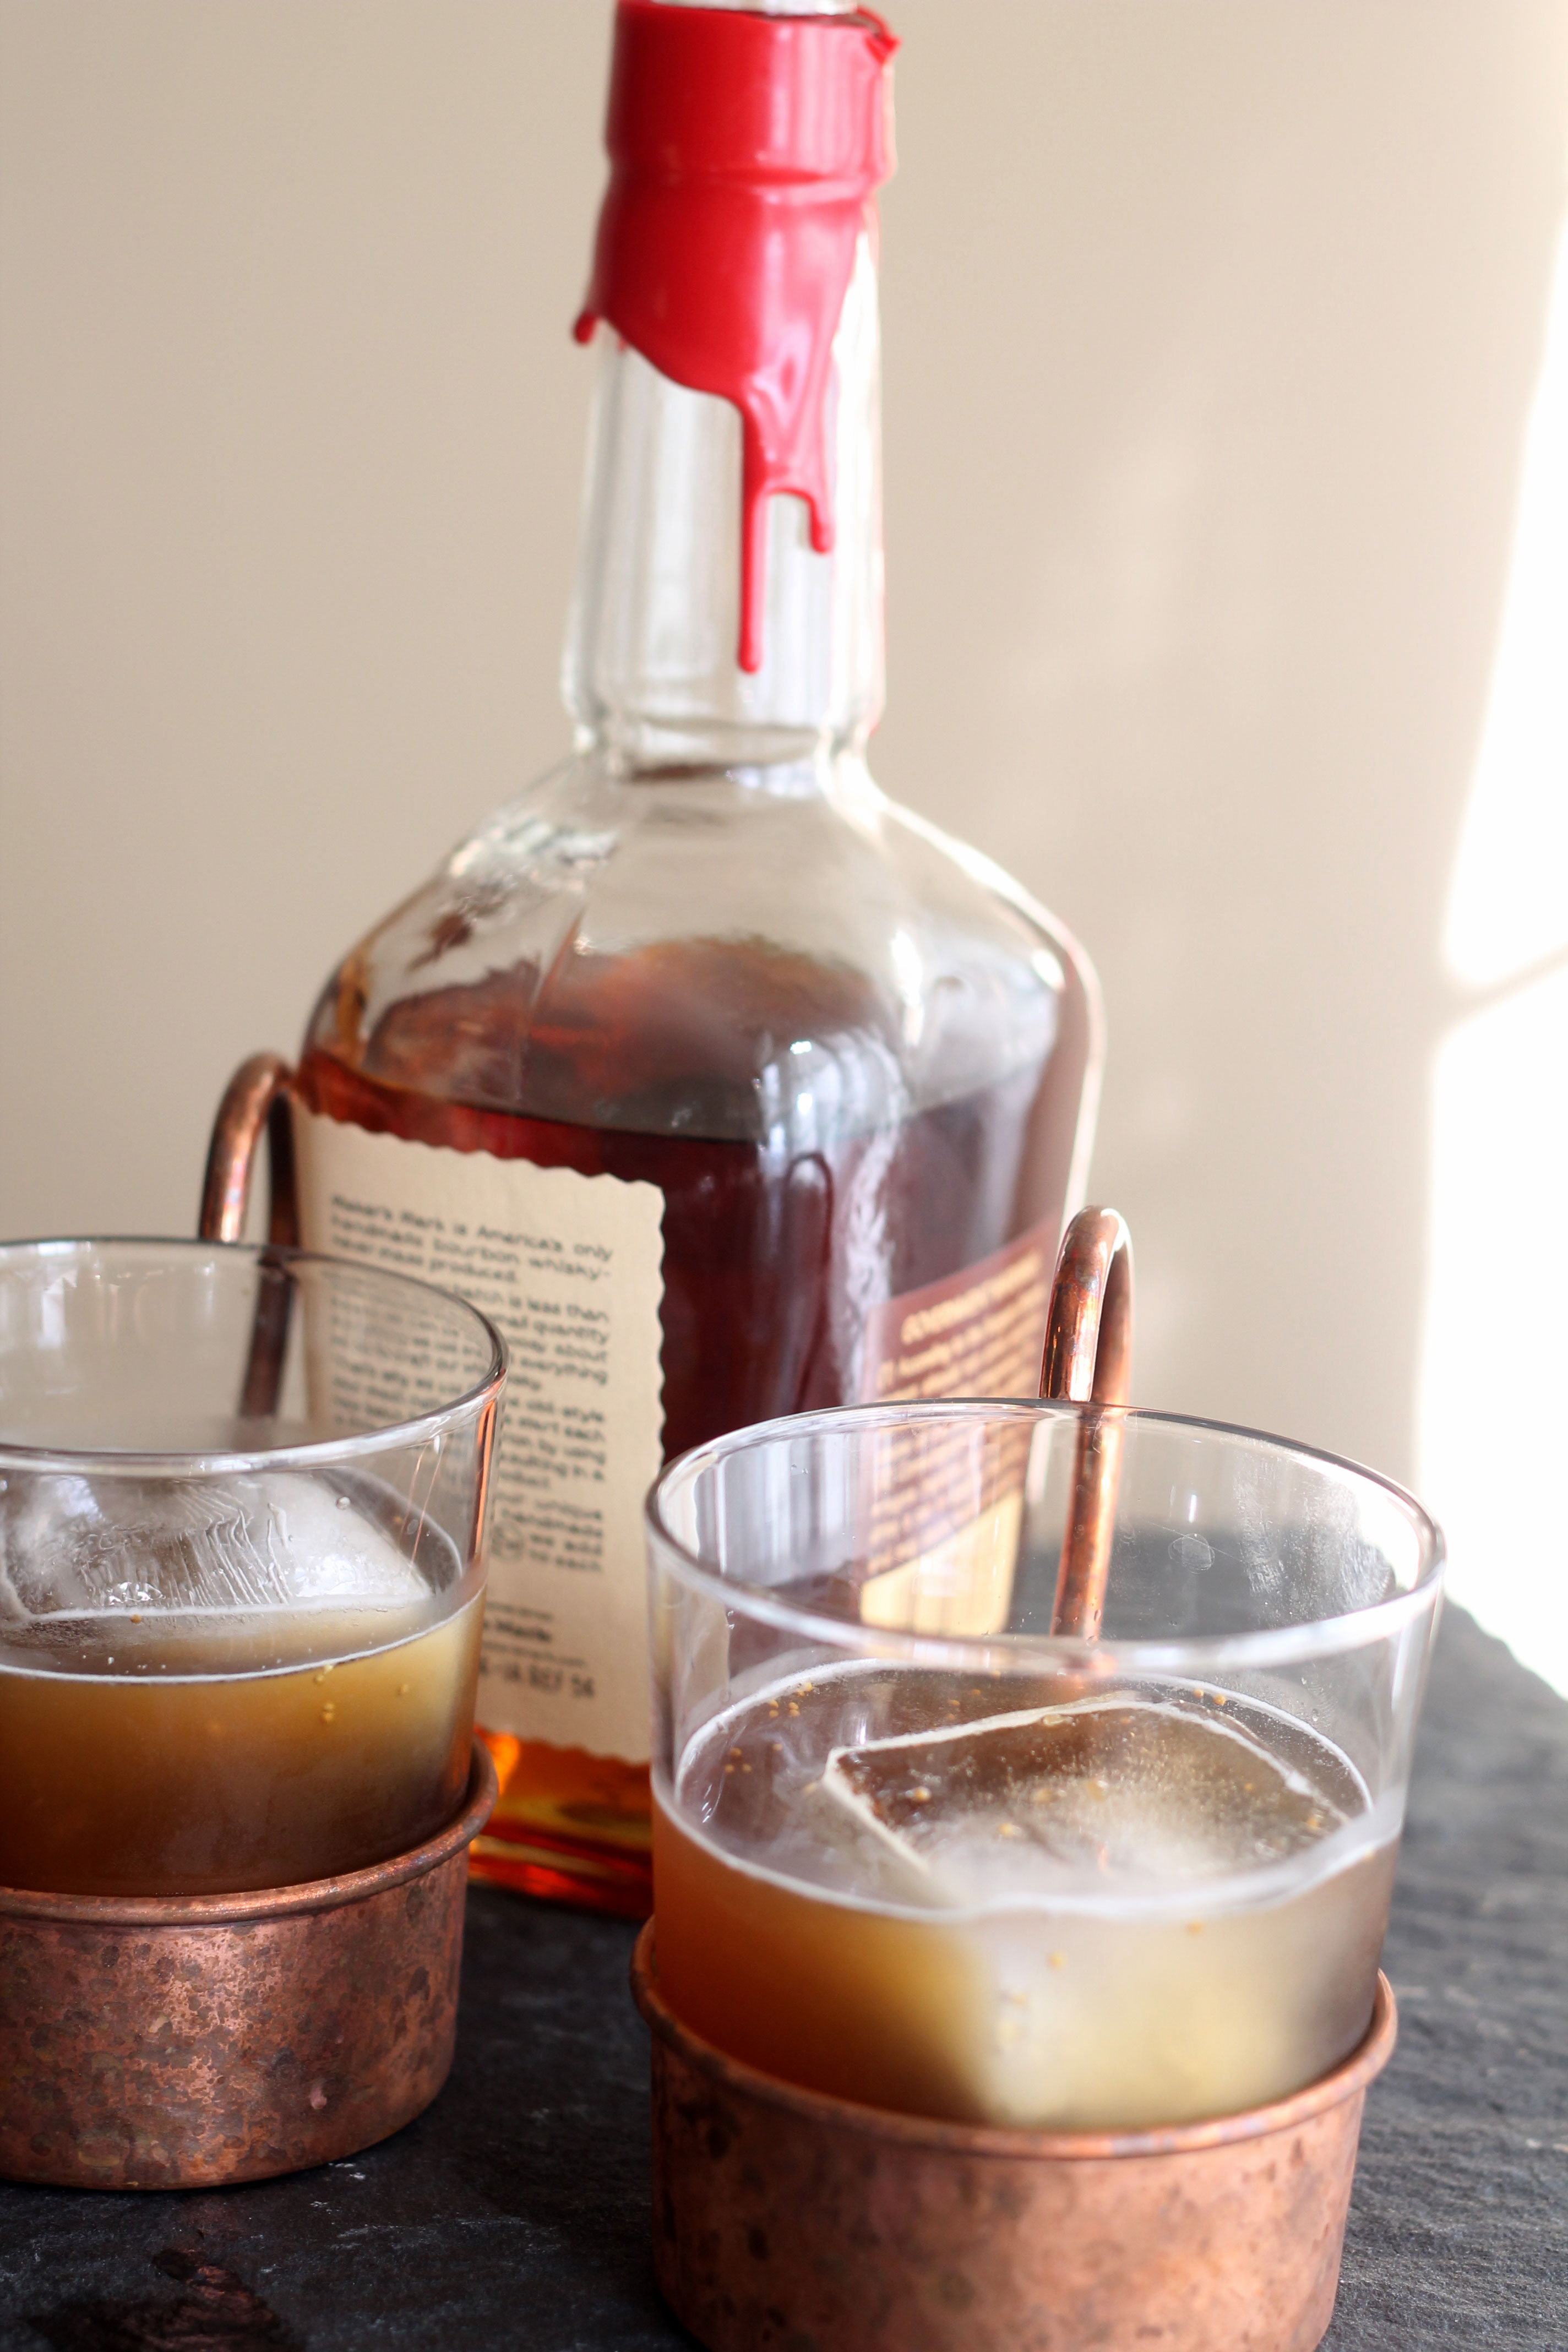 A sweet Bourbon cocktail that will have you wanting more!